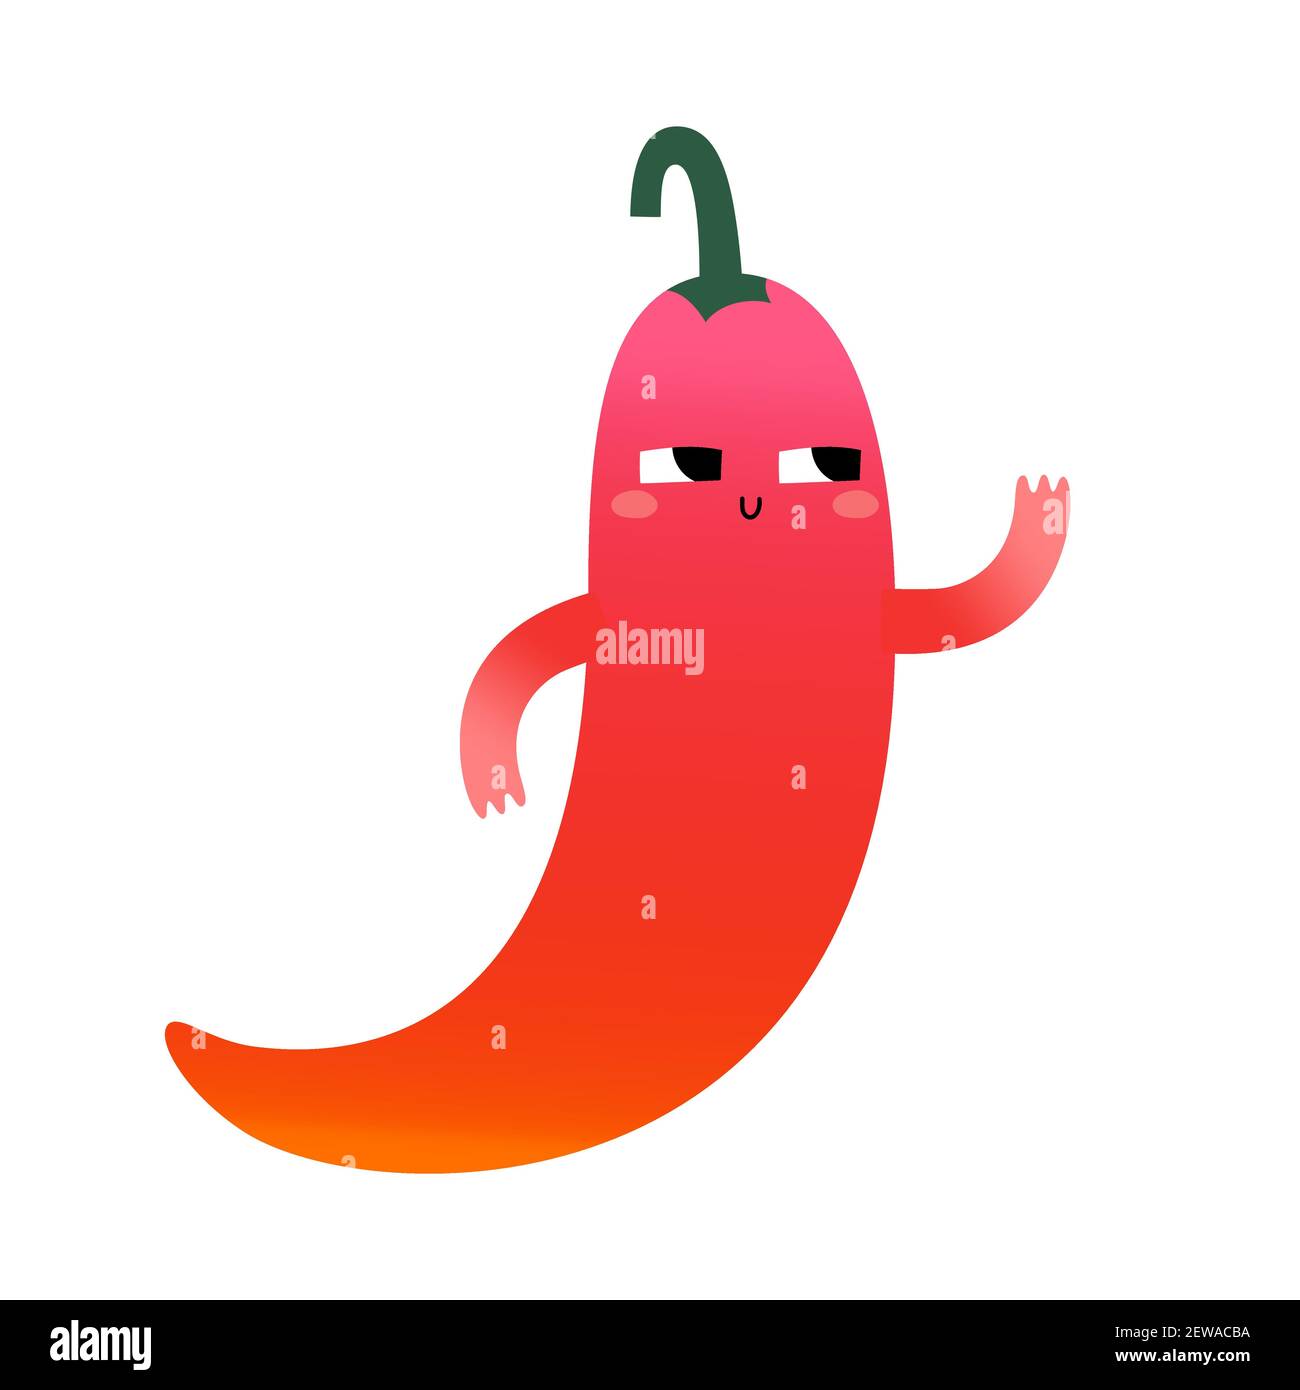 Cute chili pepper character, red pepper mascot, kawaii cartoon vegetable character with funny face expression, vector illustration isolated on white Stock Vector